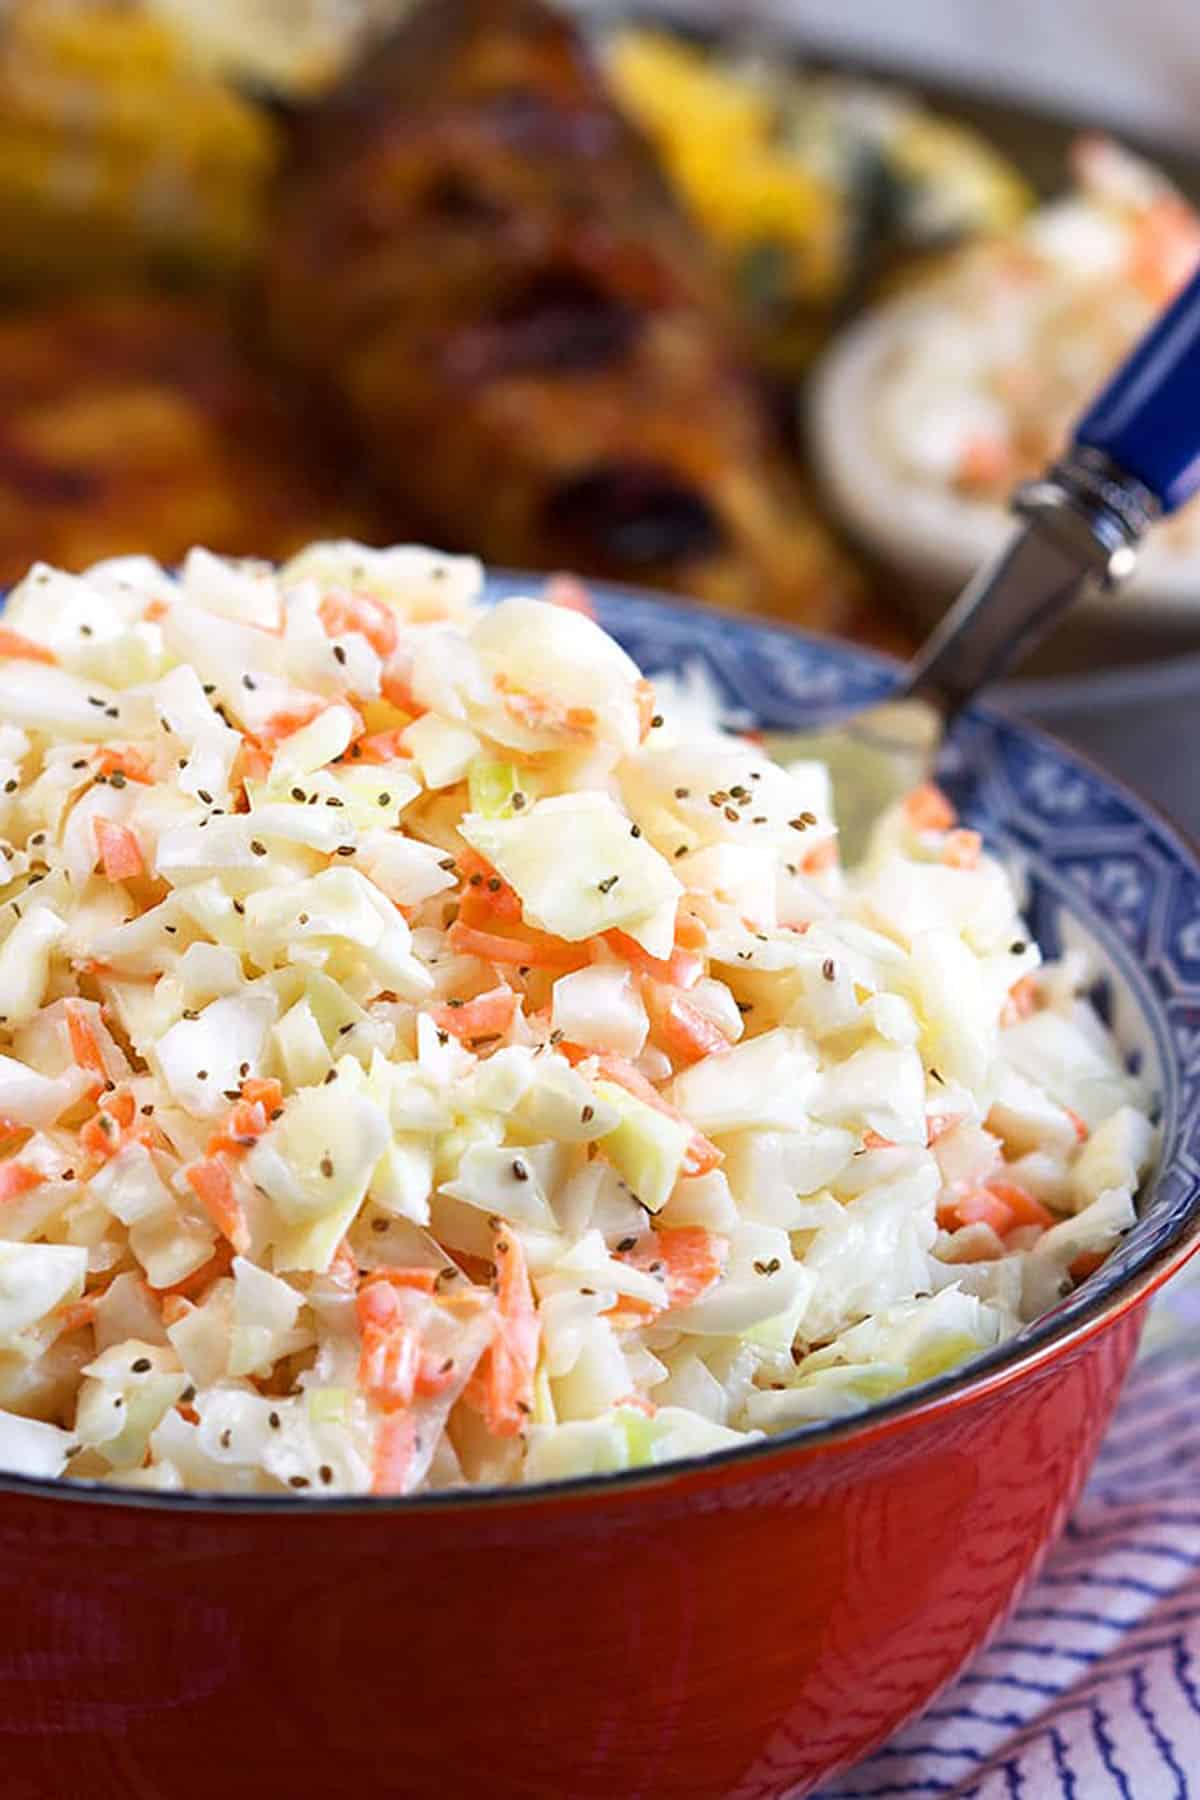 Coleslaw in a red bowl on a blue and white napkin.